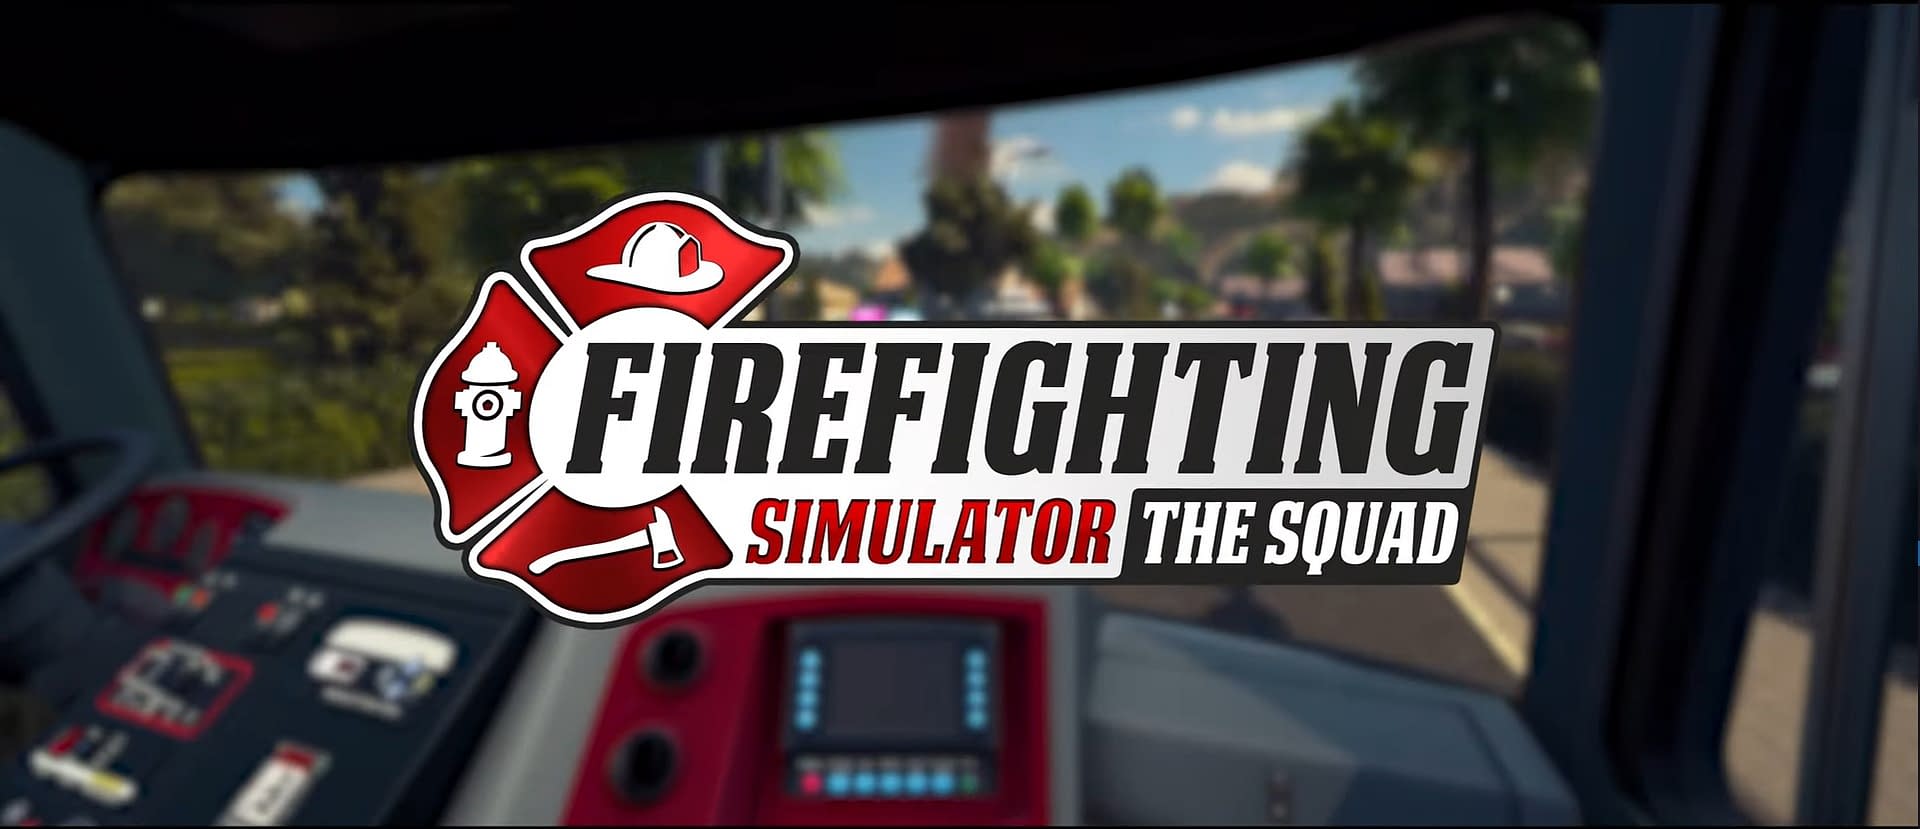 Firefighting – Simulator Consoles Squad On The To Arrive